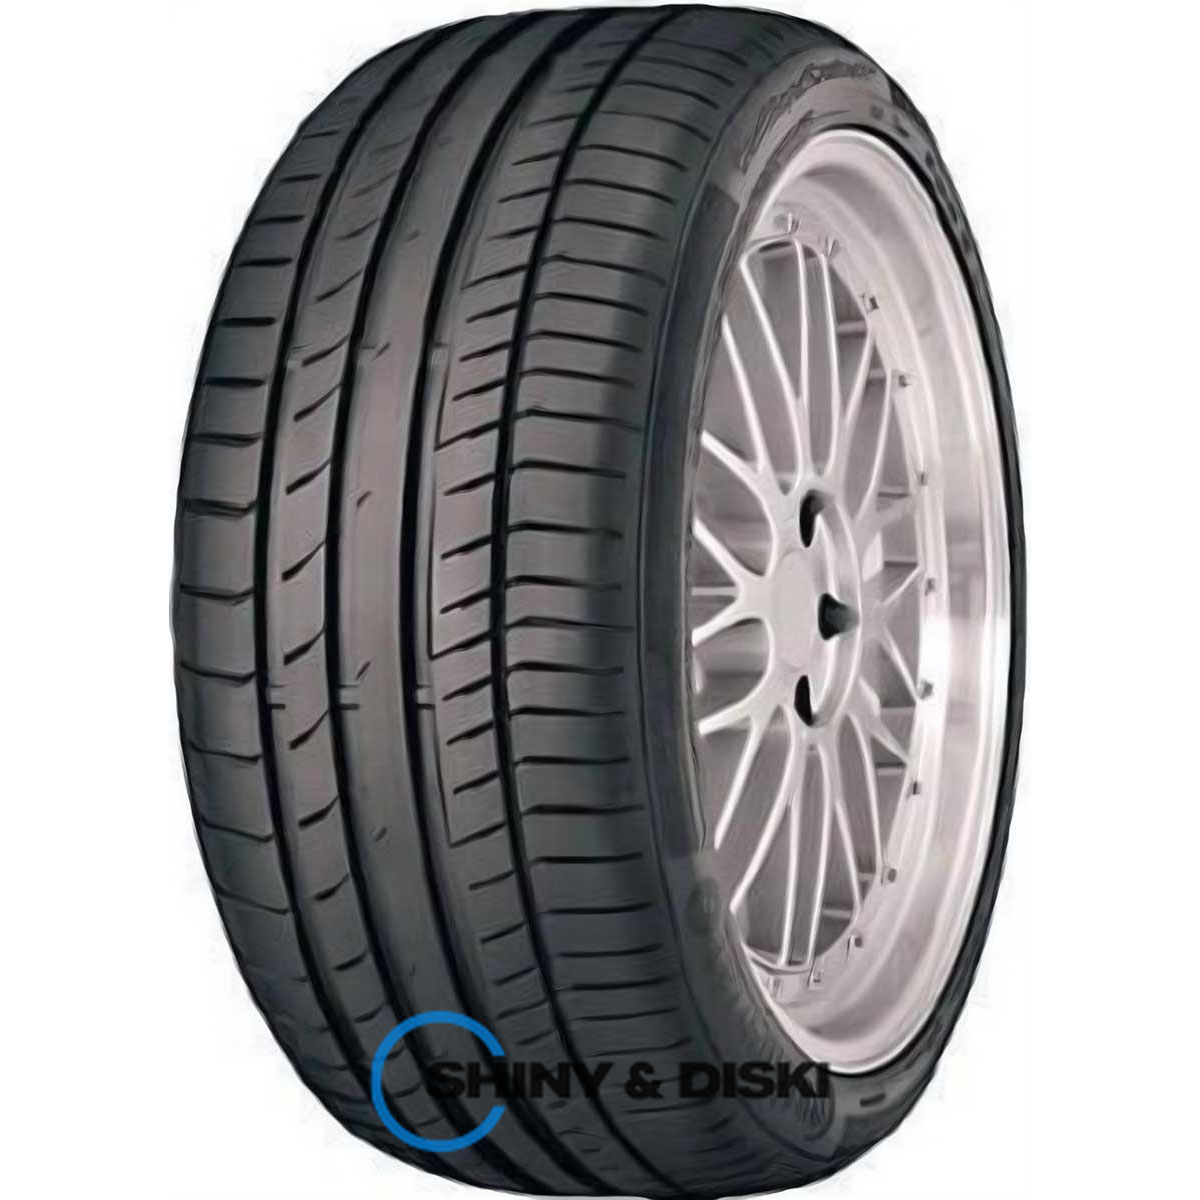 continental sportcontact 5p 235/40 r18 95y xl mo